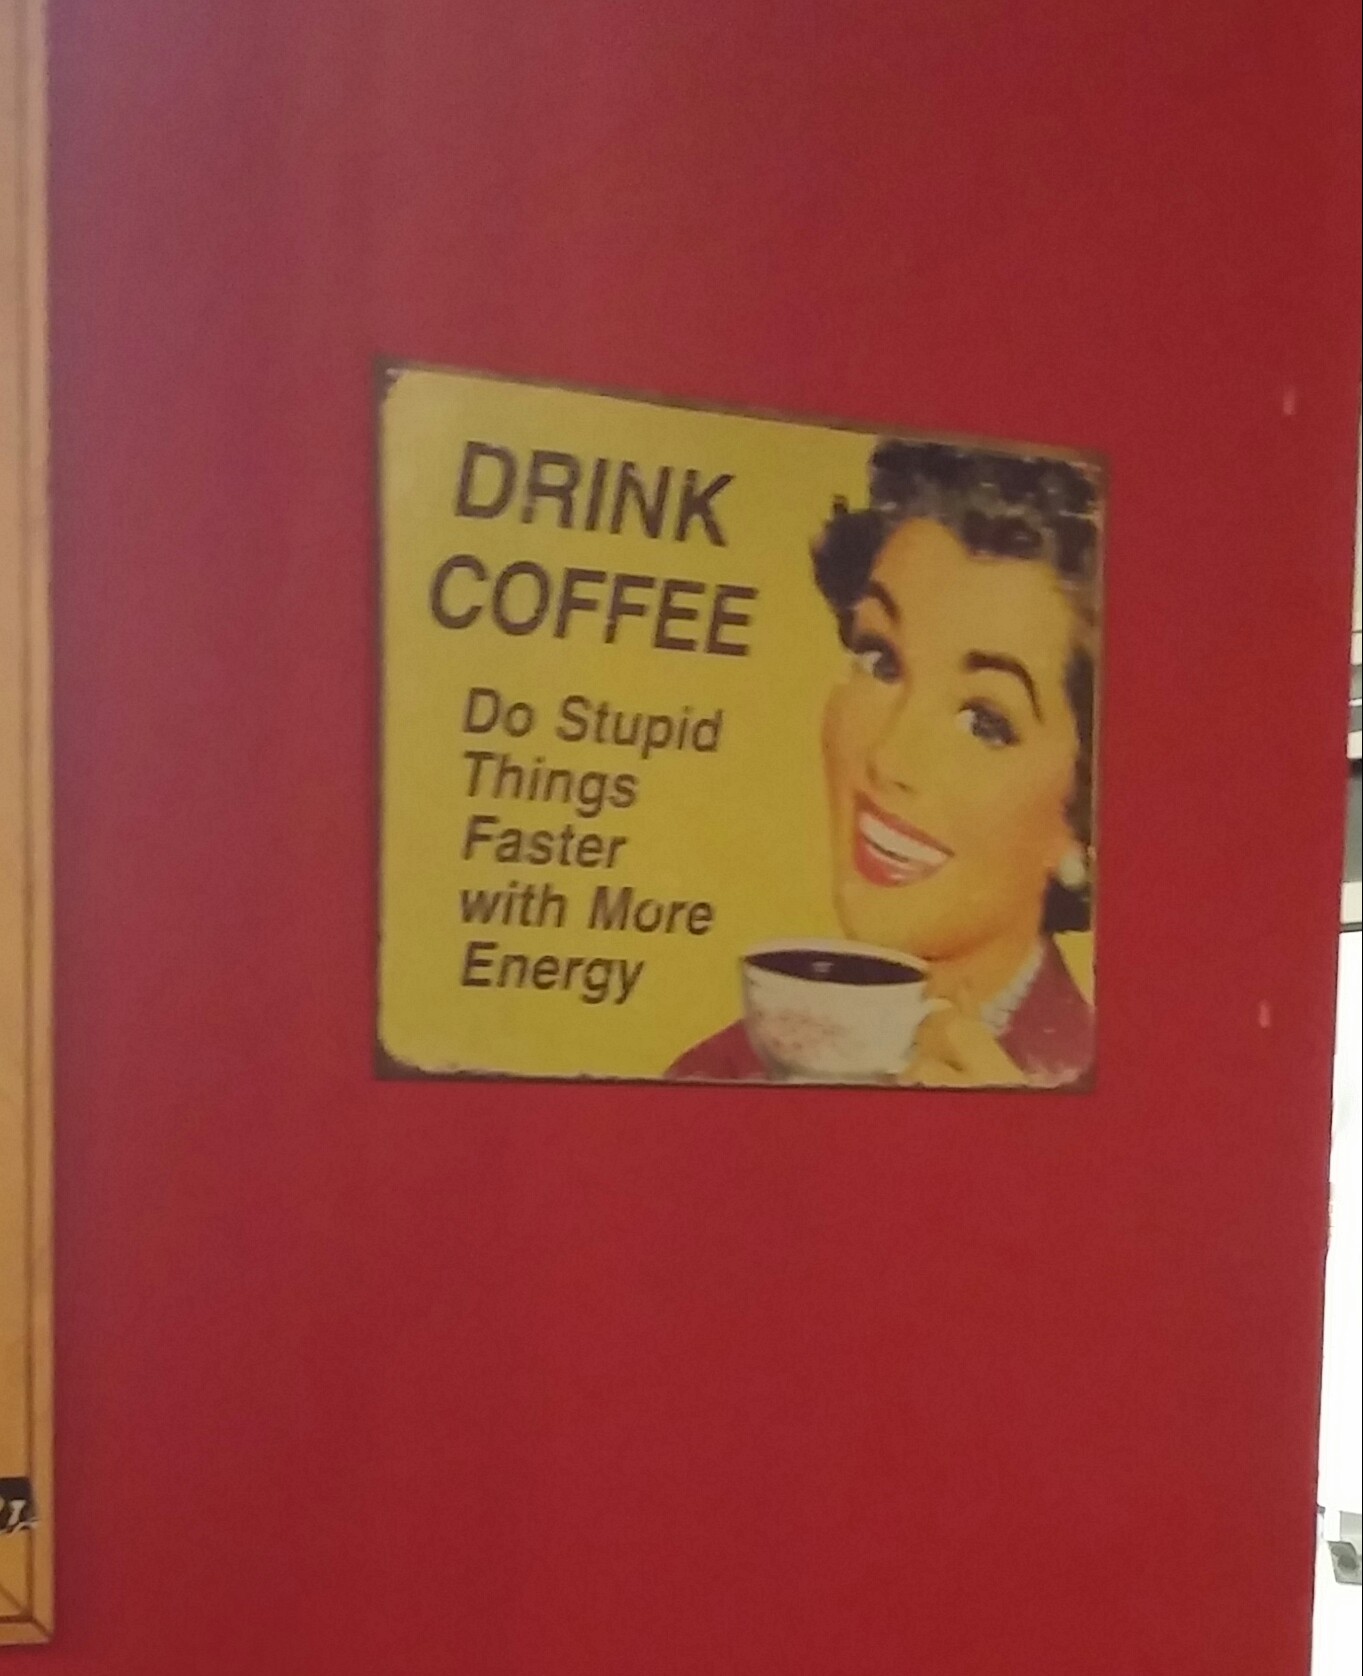 On the wall at the local coffee shop...